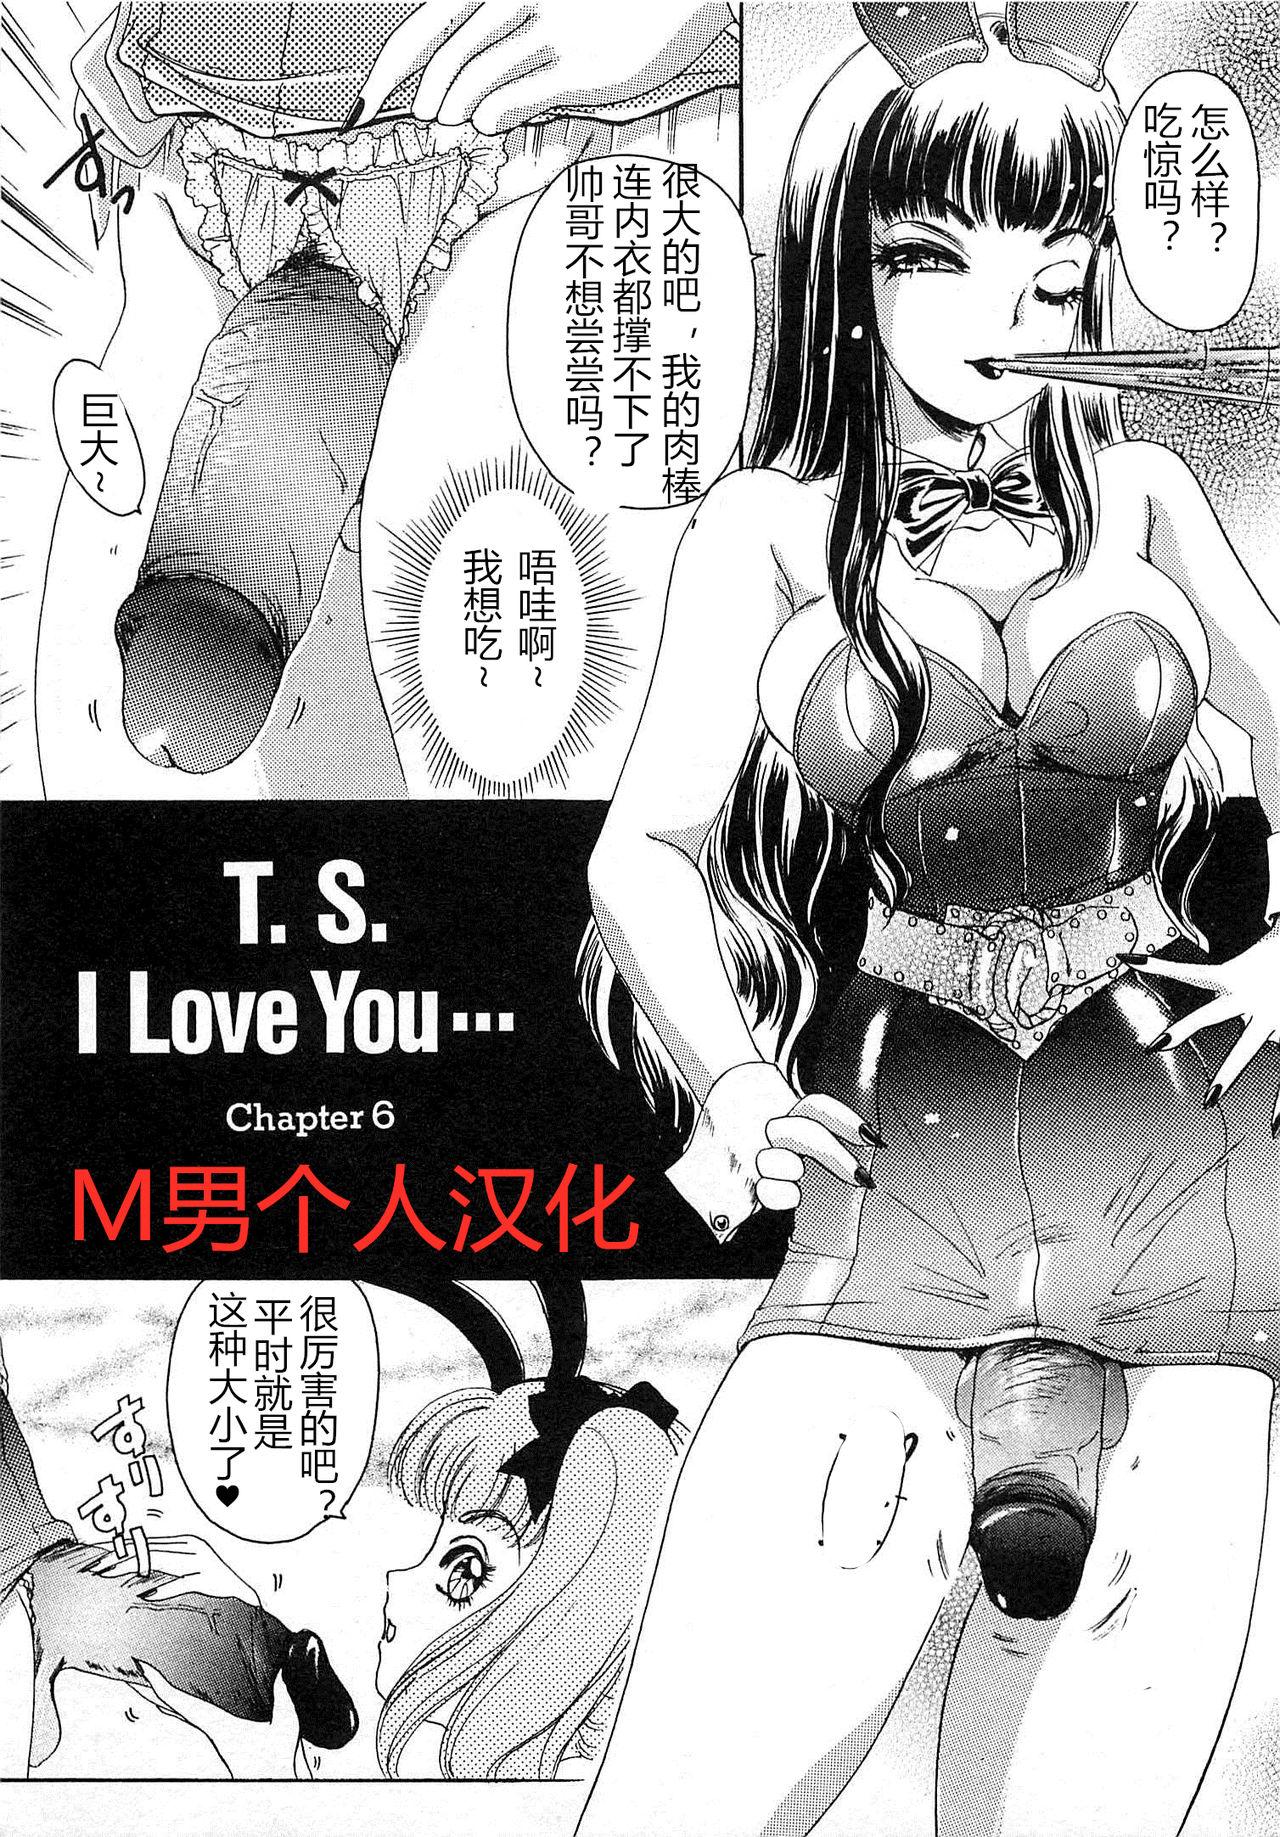 T.S. I LOVE YOU chapter 06 1